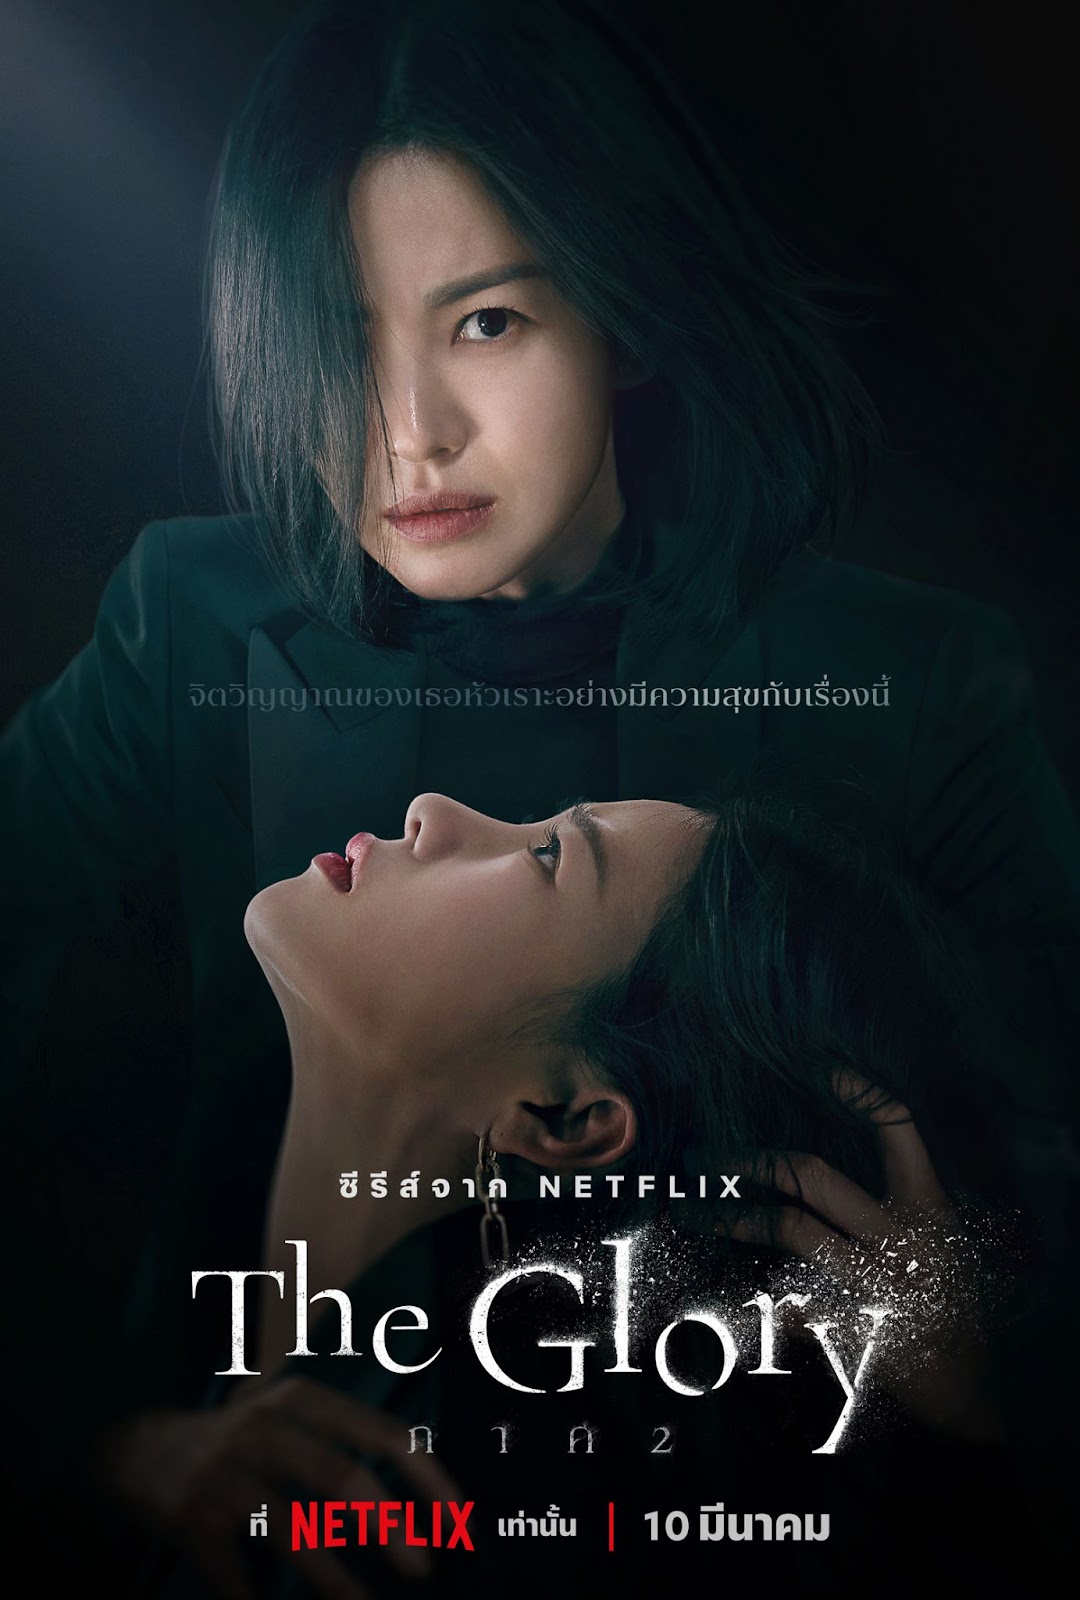 The Glory Part 1 & 2 - Unspoiled Review